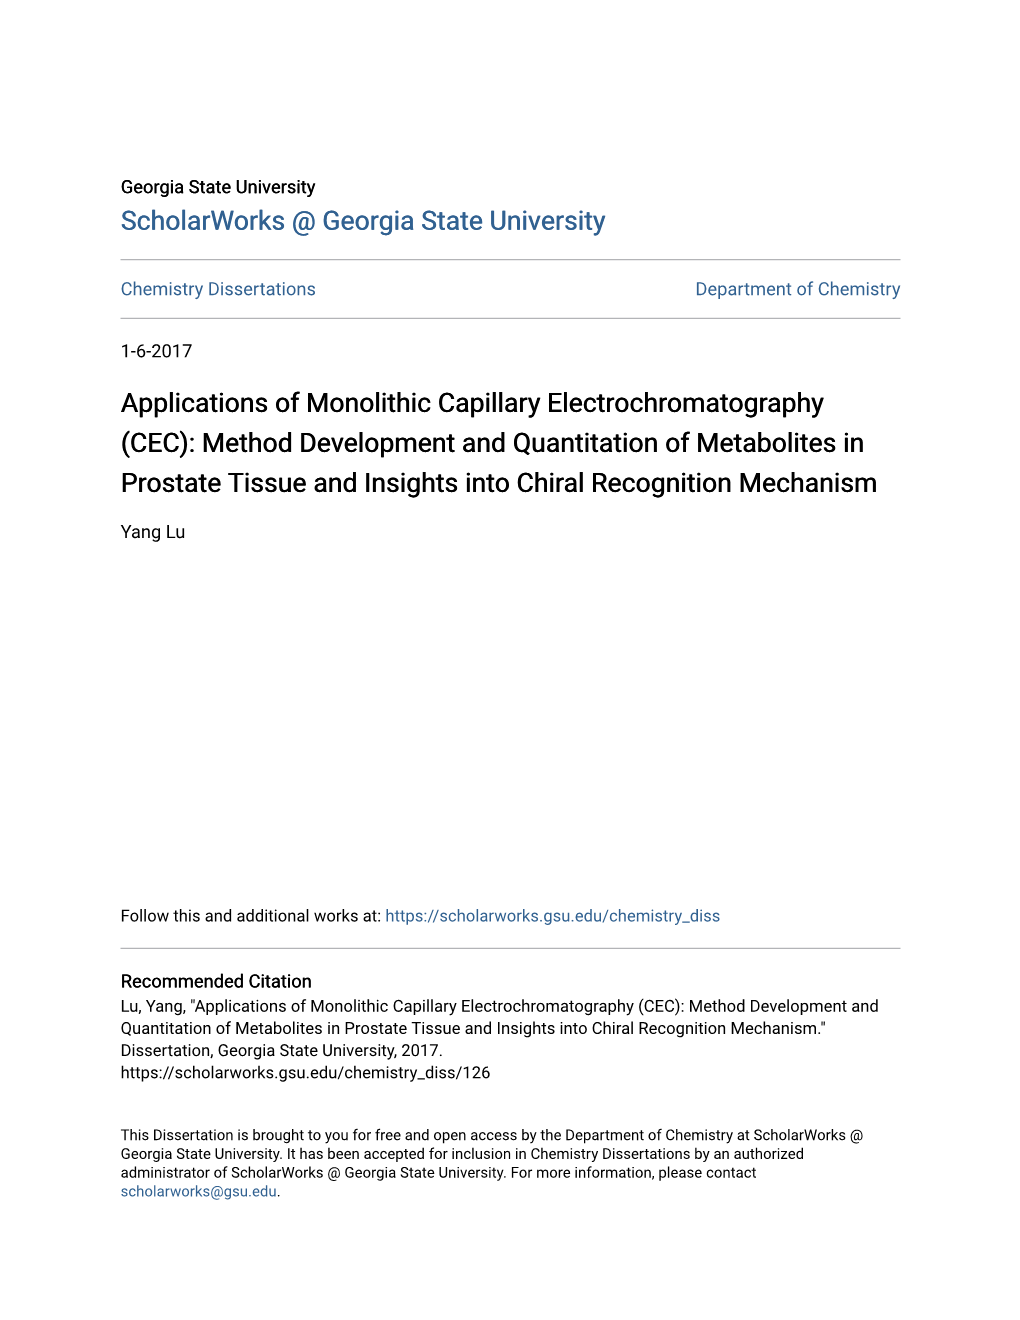 Applications of Monolithic Capillary Electrochromatography (CEC